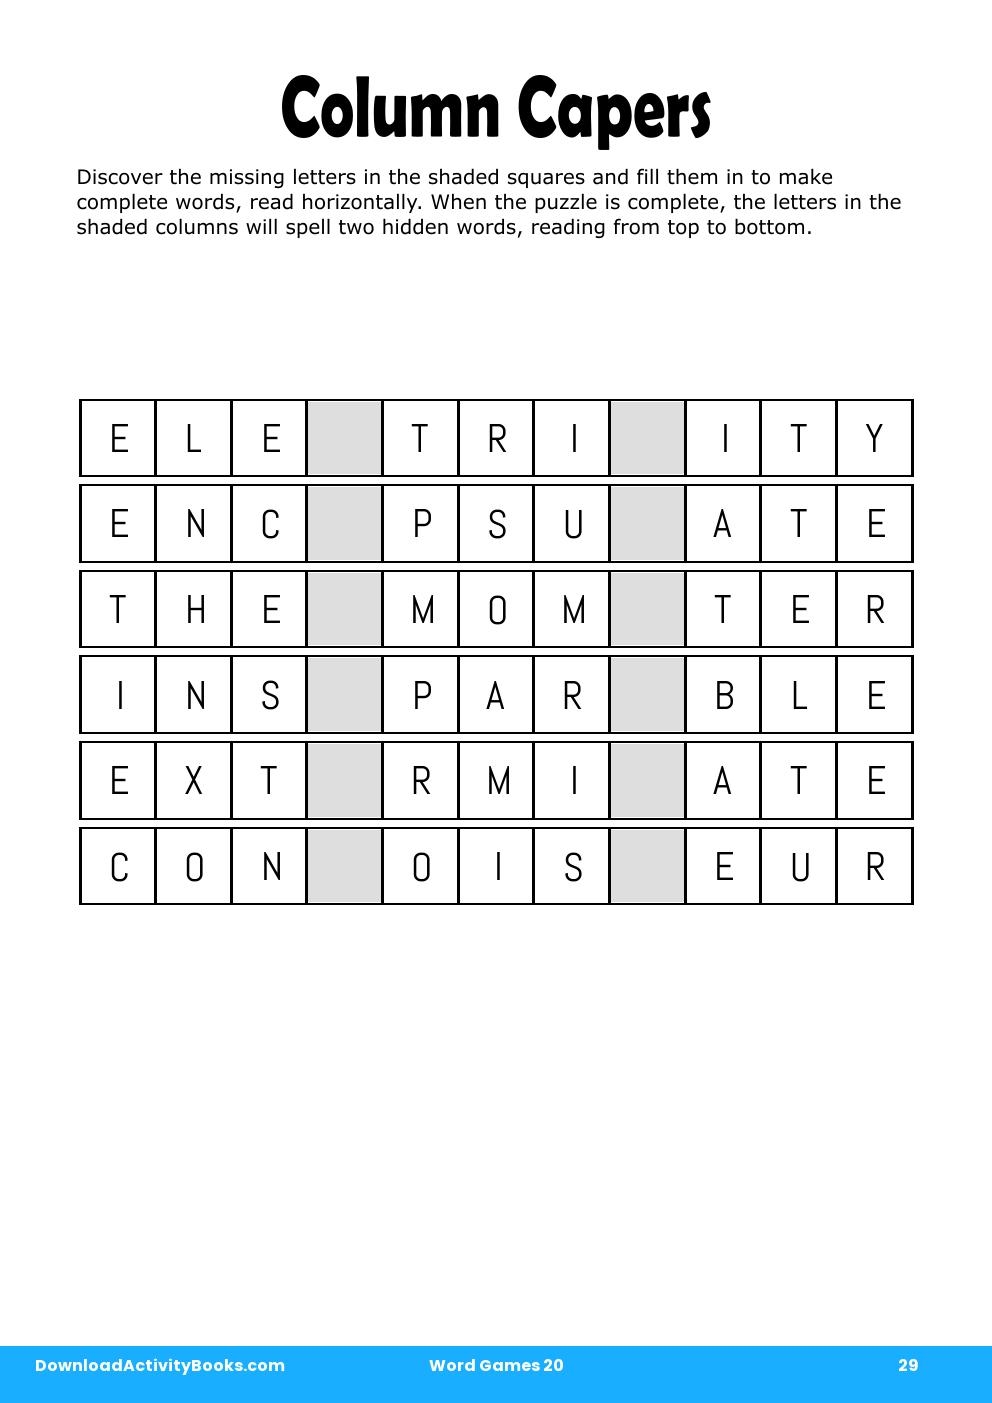 Column Capers in Word Games 20